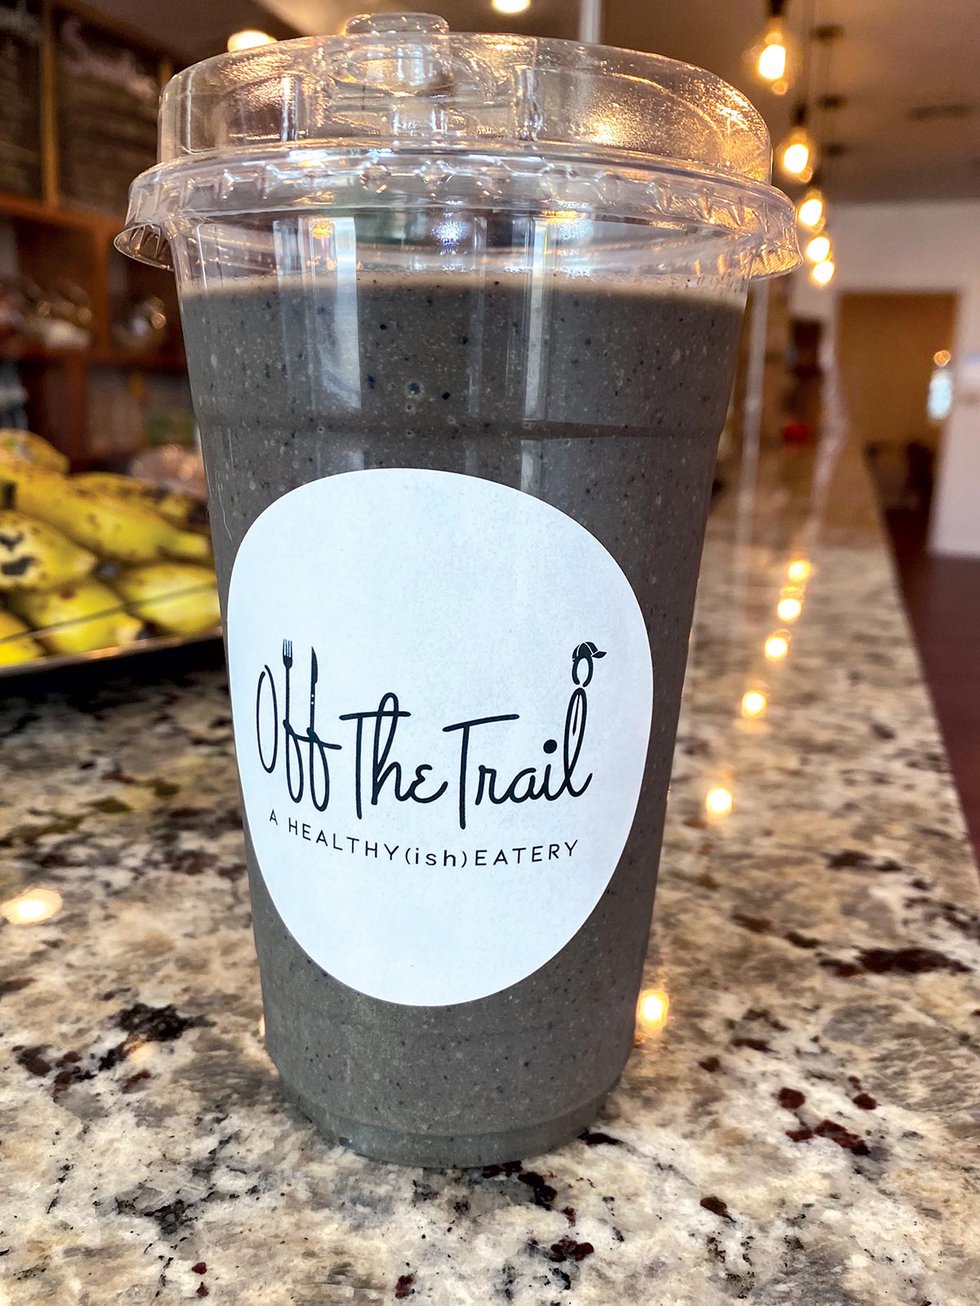 offthetrail-smoothie-web.jpg